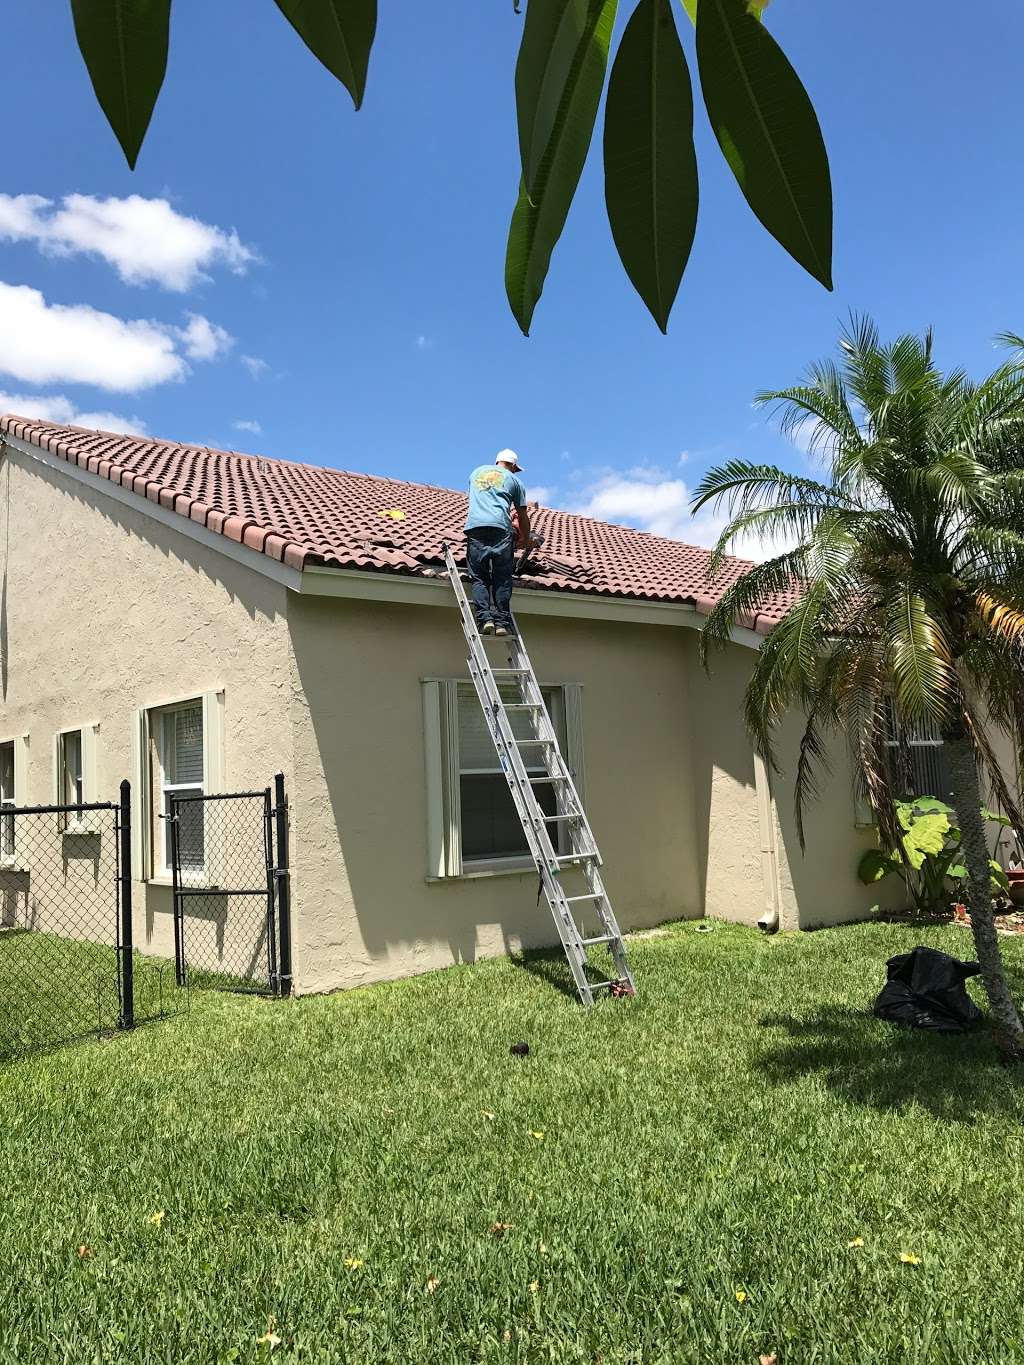 Weston Roof Repairs & Roof Inspections | 2021 NW 136th Ave unit 184, Sunrise, FL 33323 | Phone: (954) 380-7663